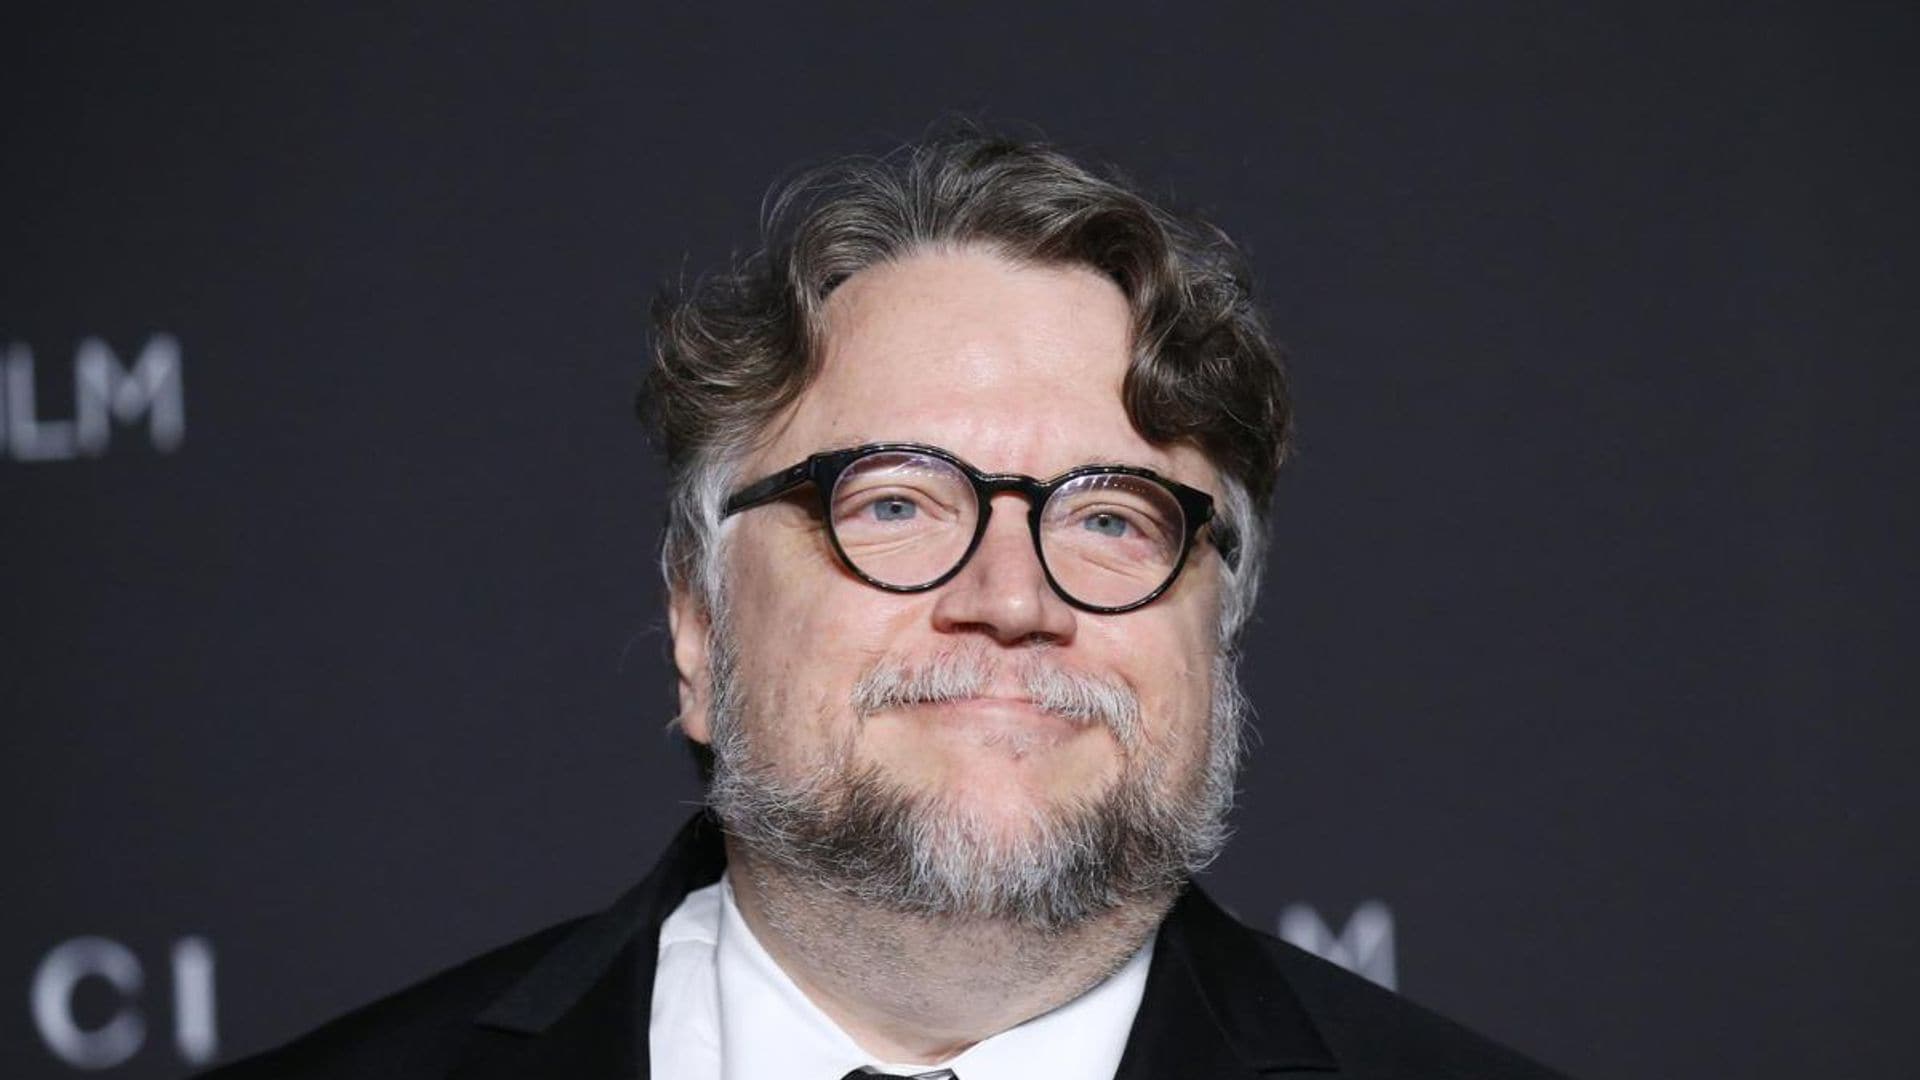 Guillermo del Toro teases upcoming ‘monster movie,’ and many think it is about Frankenstein